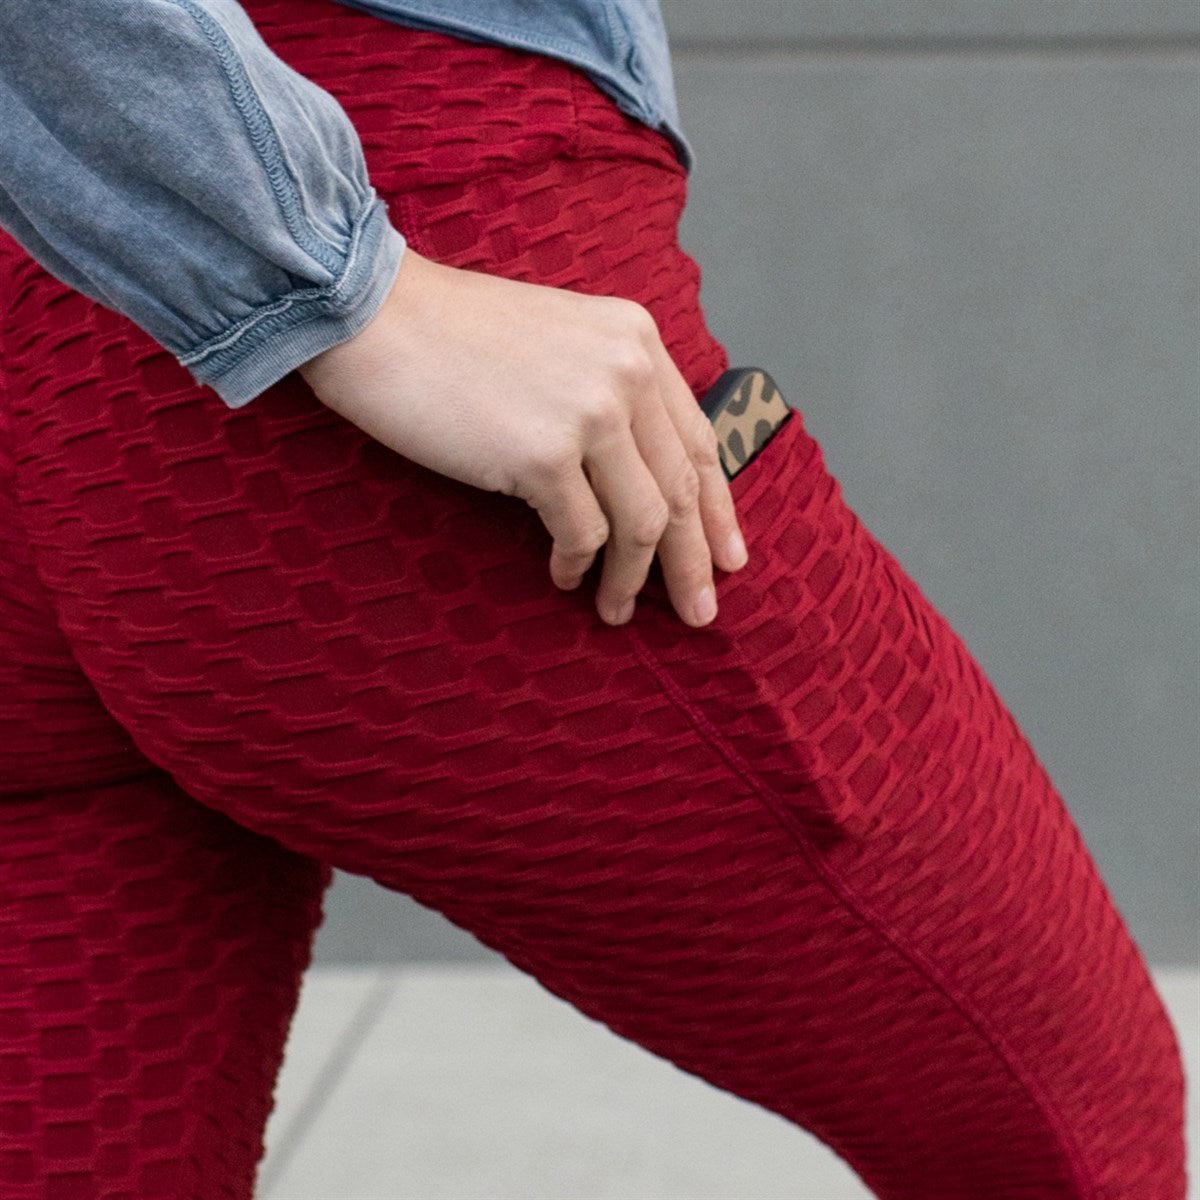 Our Top Leggings to Hide Cellulite - Lili Warrior